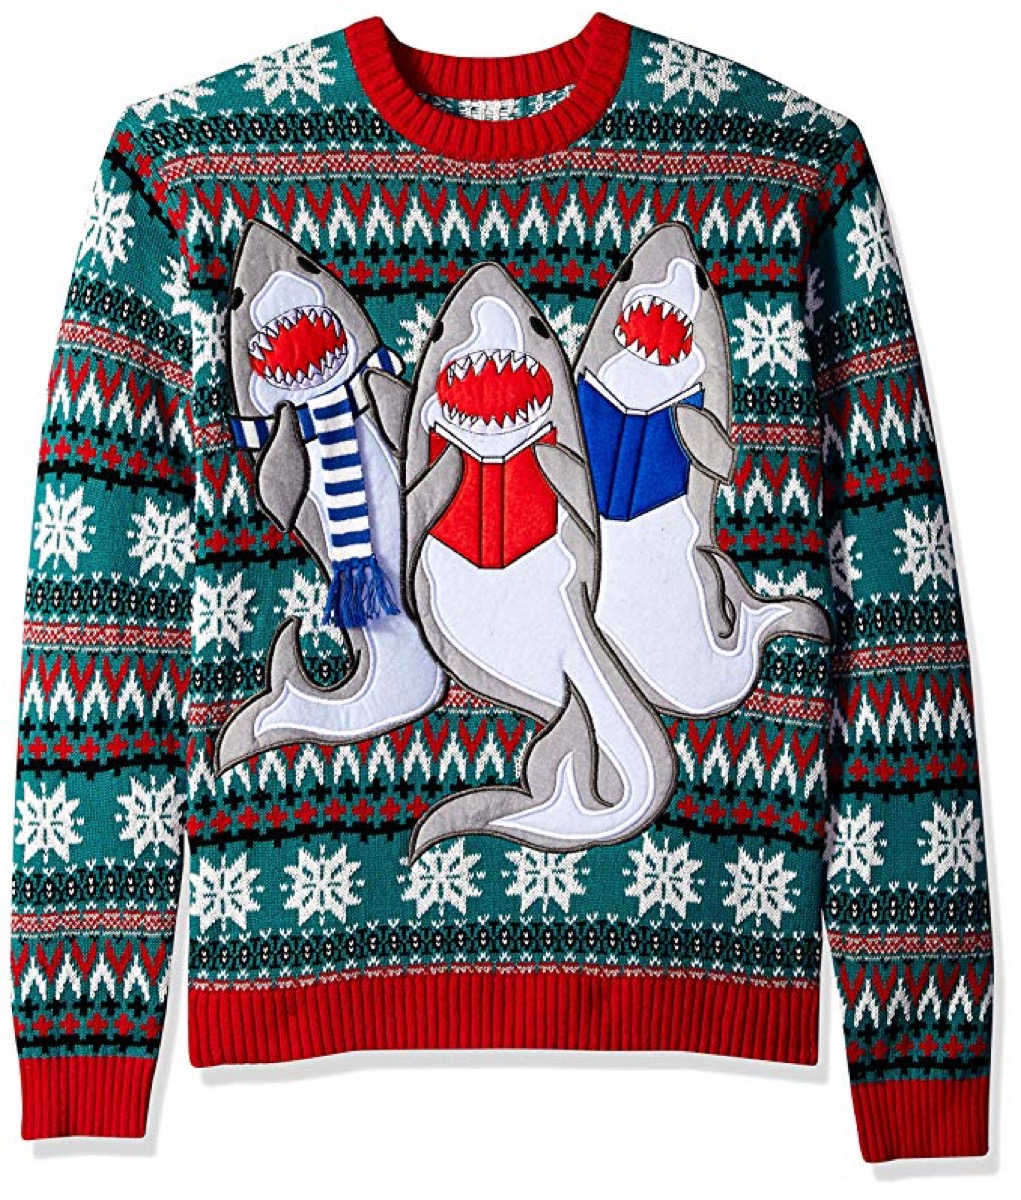 man wearing striped christmas sweater with three singing sharks in scarves on it